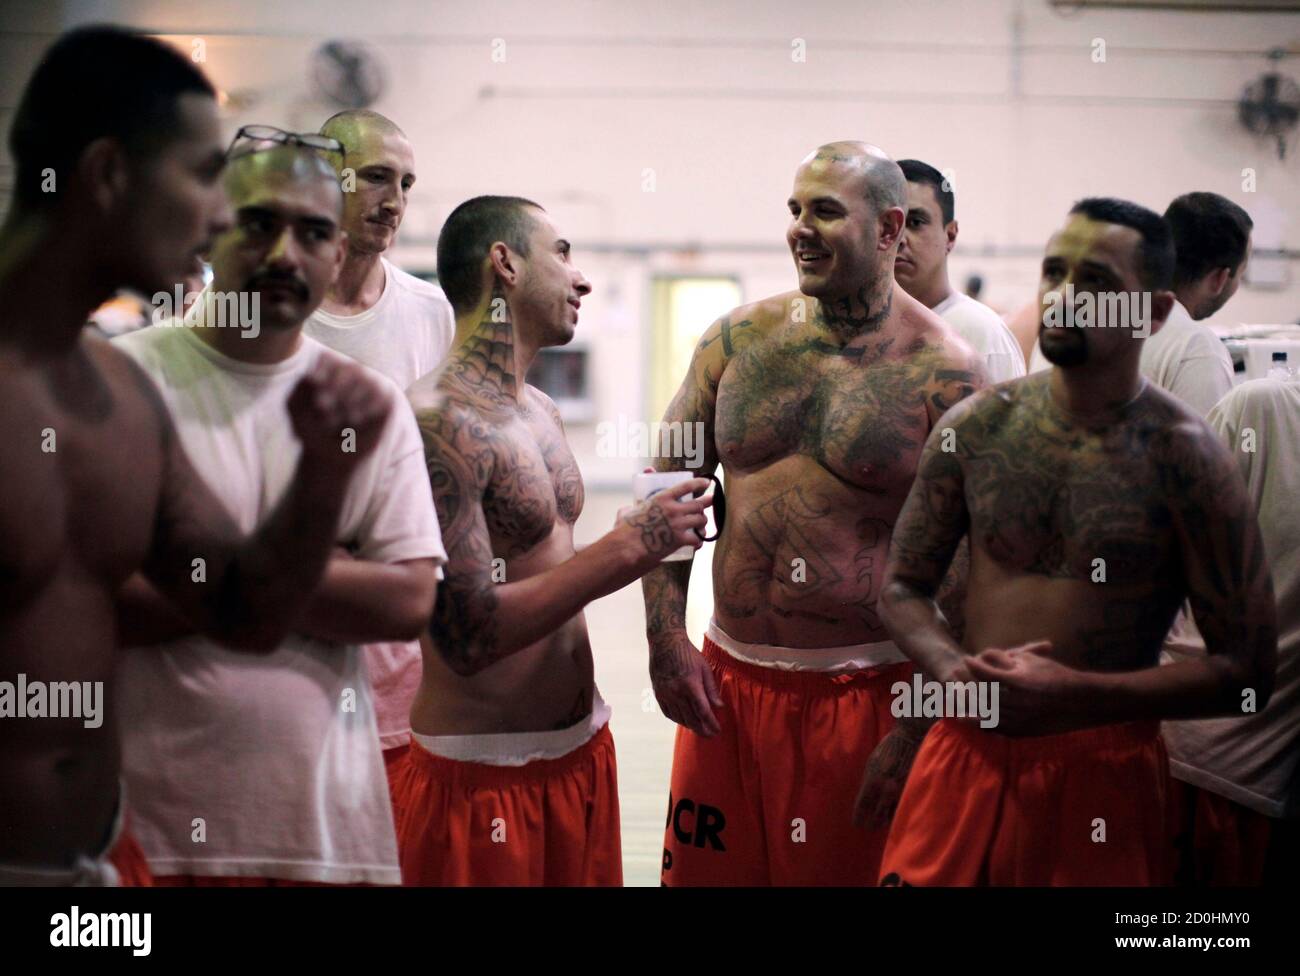 Inmates stand in a gymnasium where they are housed due to overcrowding at the California Institution for Men state prison in Chino, California, June 3, 2011. The Supreme Court has ordered California to release more than 30,000 inmates over the next two years or take other steps to ease overcrowding in its prisons to prevent "needless suffering and death." California's 33 adult prisons were designed to hold about 80,000 inmates and now have about 145,000. The U.S. has more than 2 million people in state and local prisons. It has long had the highest incarceration rate in the world. REUTERS/Lucy Stock Photo